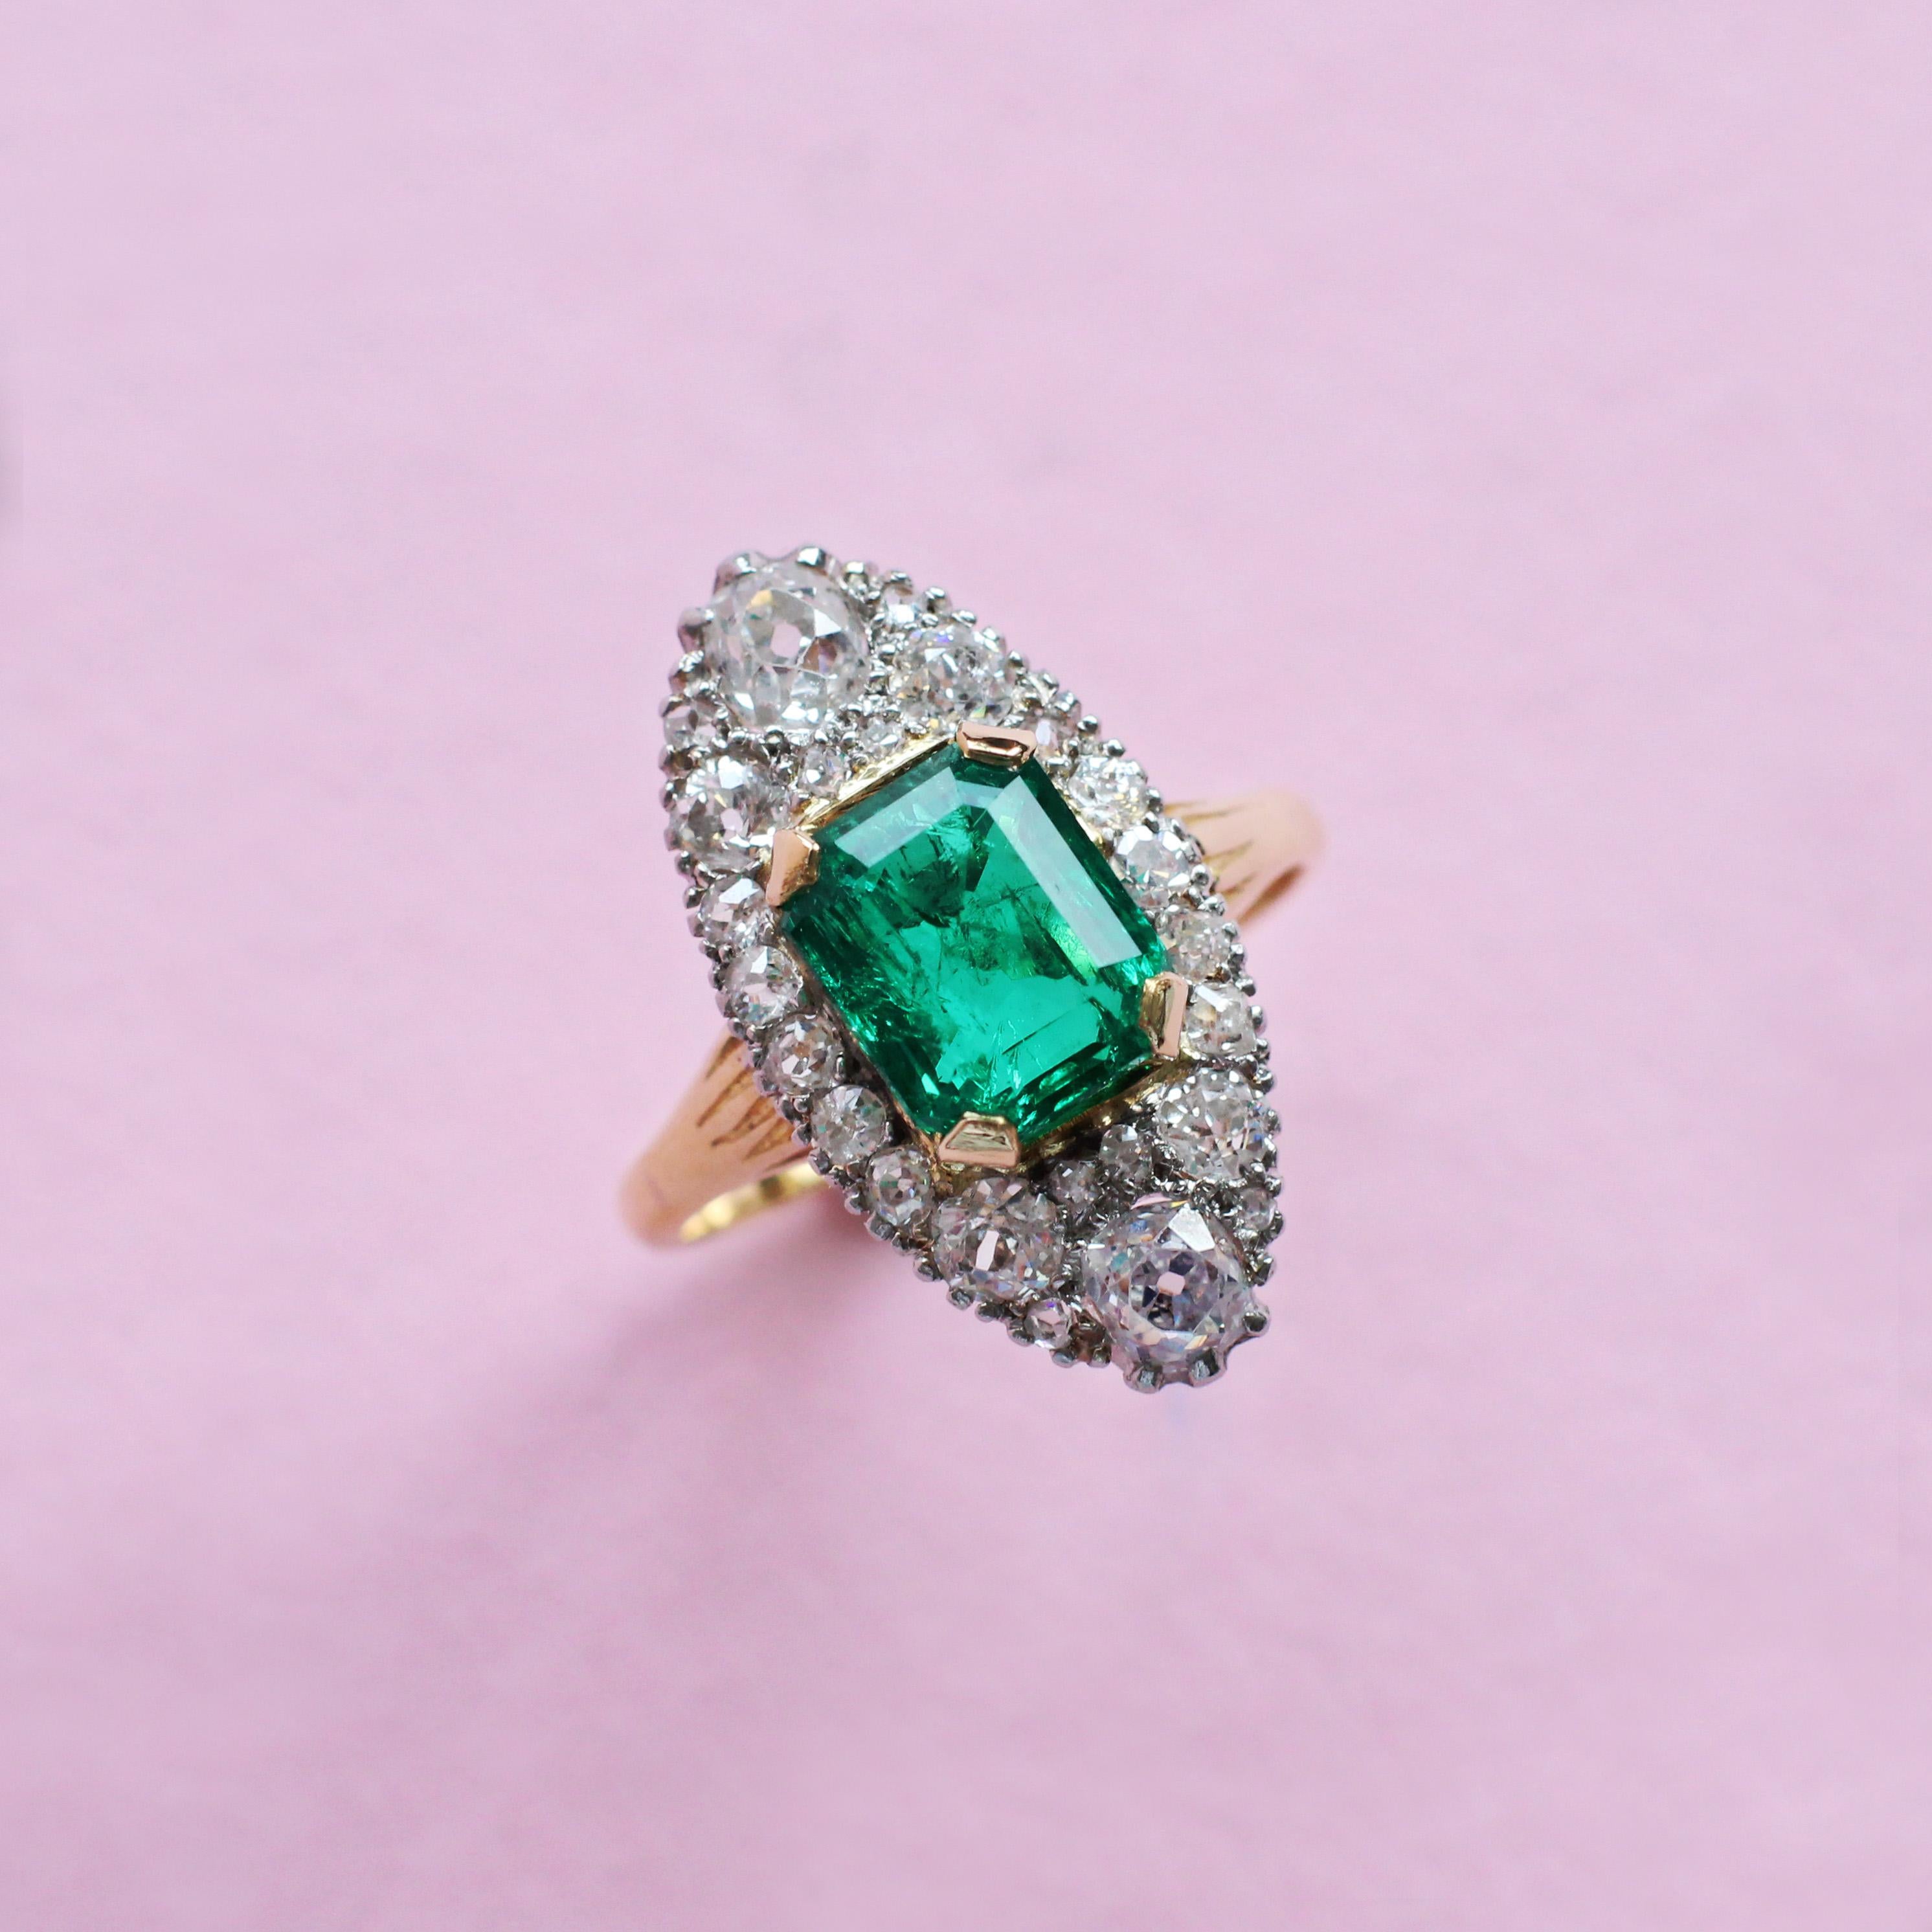 A ring quite unlike any other, this vintage-style piece was handmade in the Haruni atelier, designed to evoke sophistication and old-school glamour. At its centre is a vivid green emerald in a timeless octagon cut, while the white diamond surround